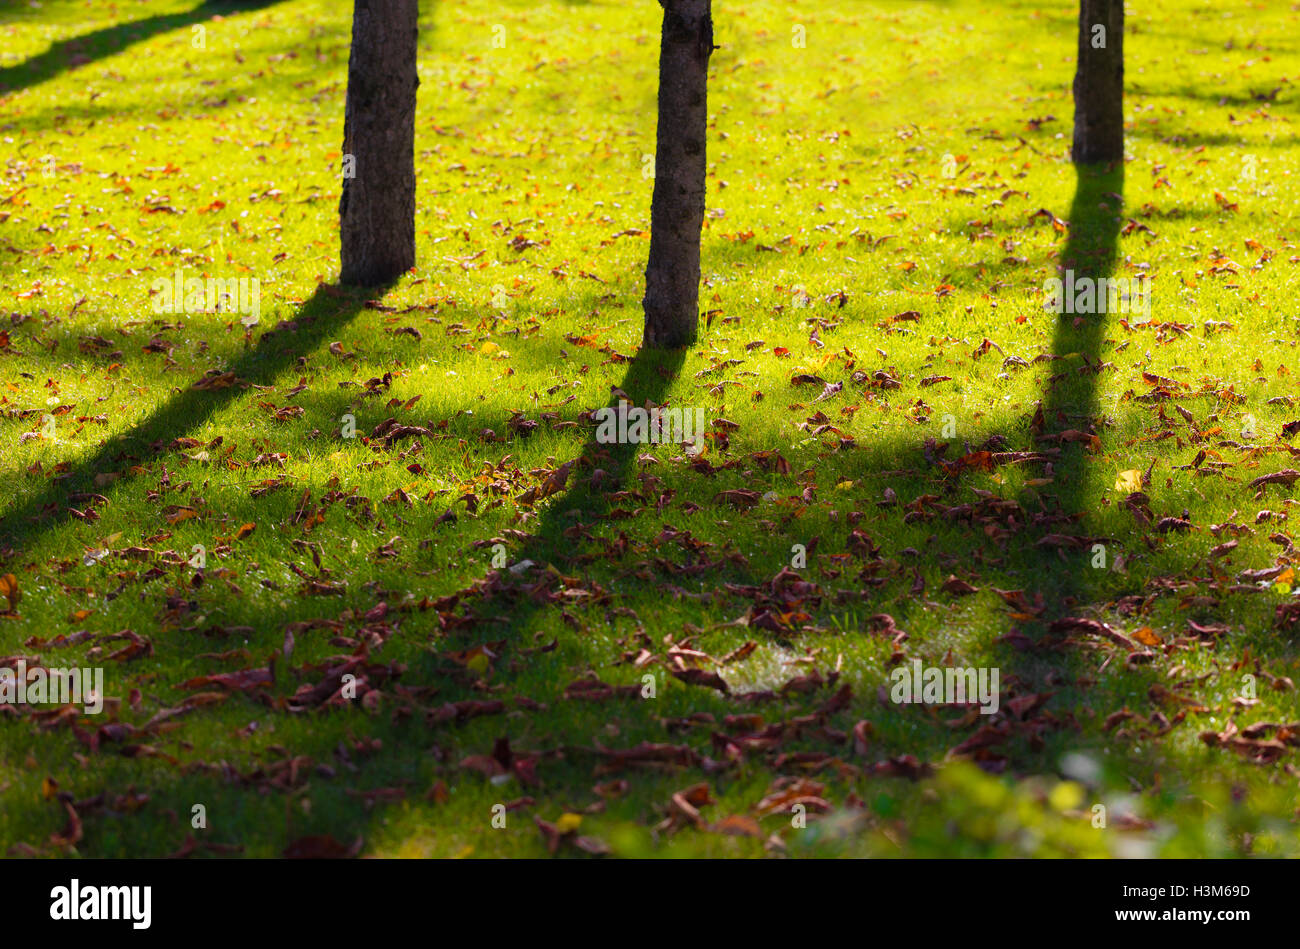 shadows from the trees on a green grass Stock Photo